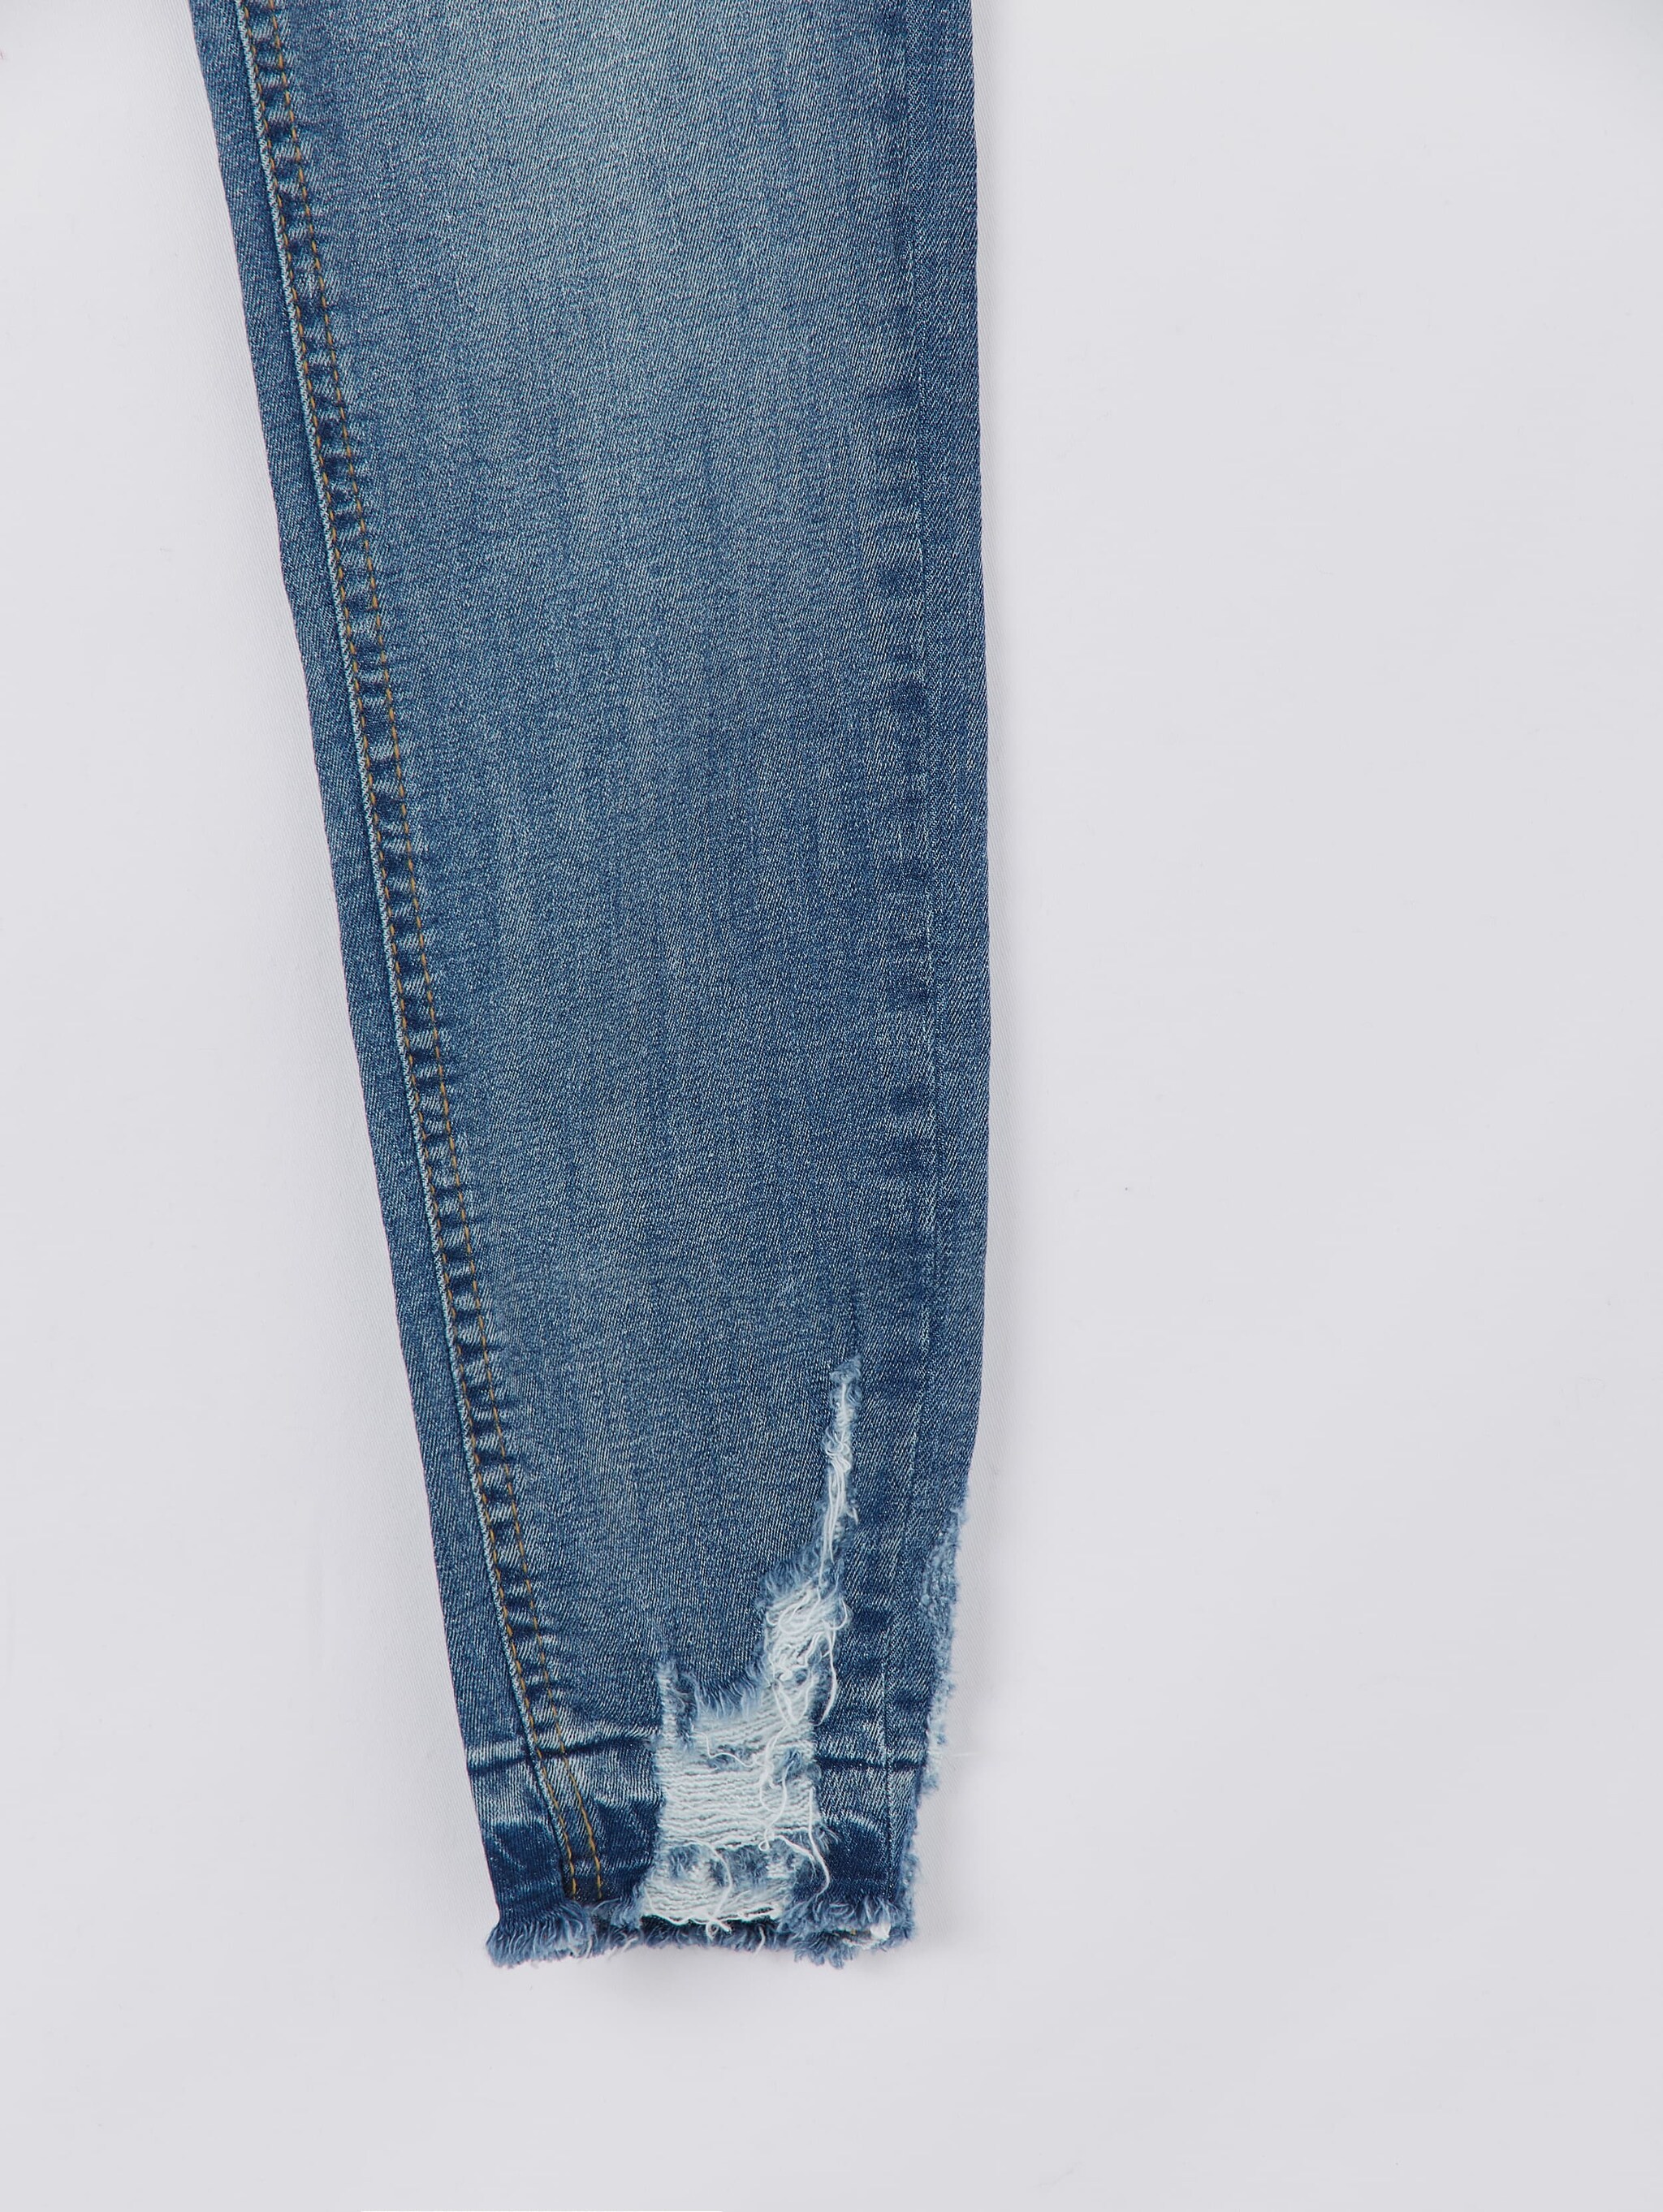 ripped jeans buy online